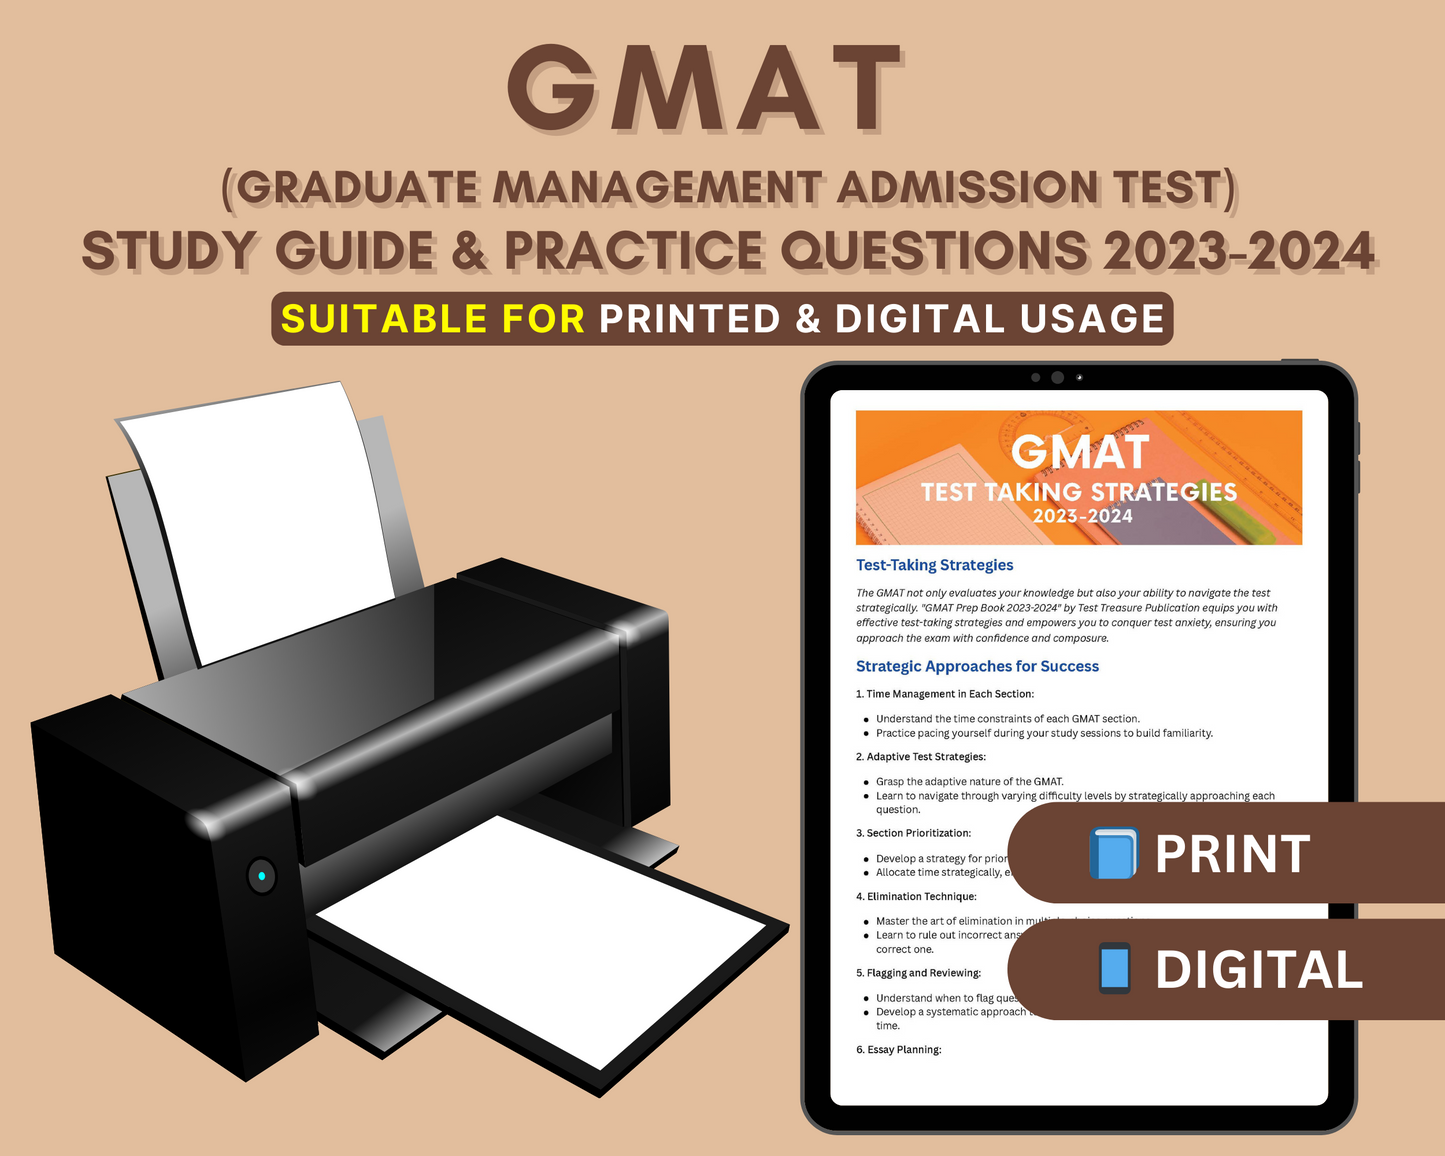 GMAT Prep Study Guide 2023-24: In-Depth Content Review, Practice Test & Exam Tips for Graduate Management Admission Test